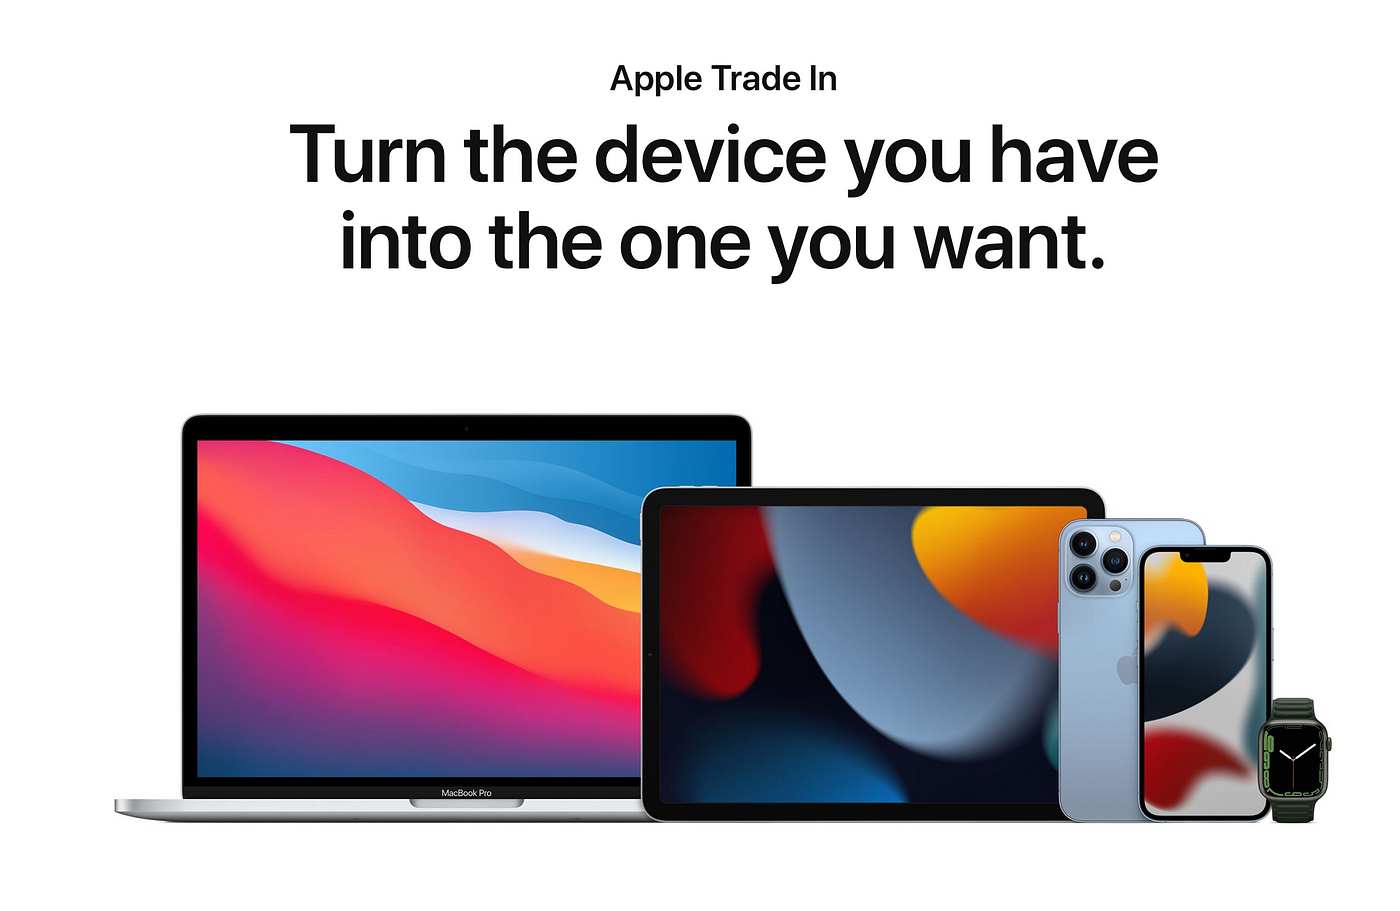 Experience of Trade-in Apple iPhone | by MING | Mac O'Clock | Medium